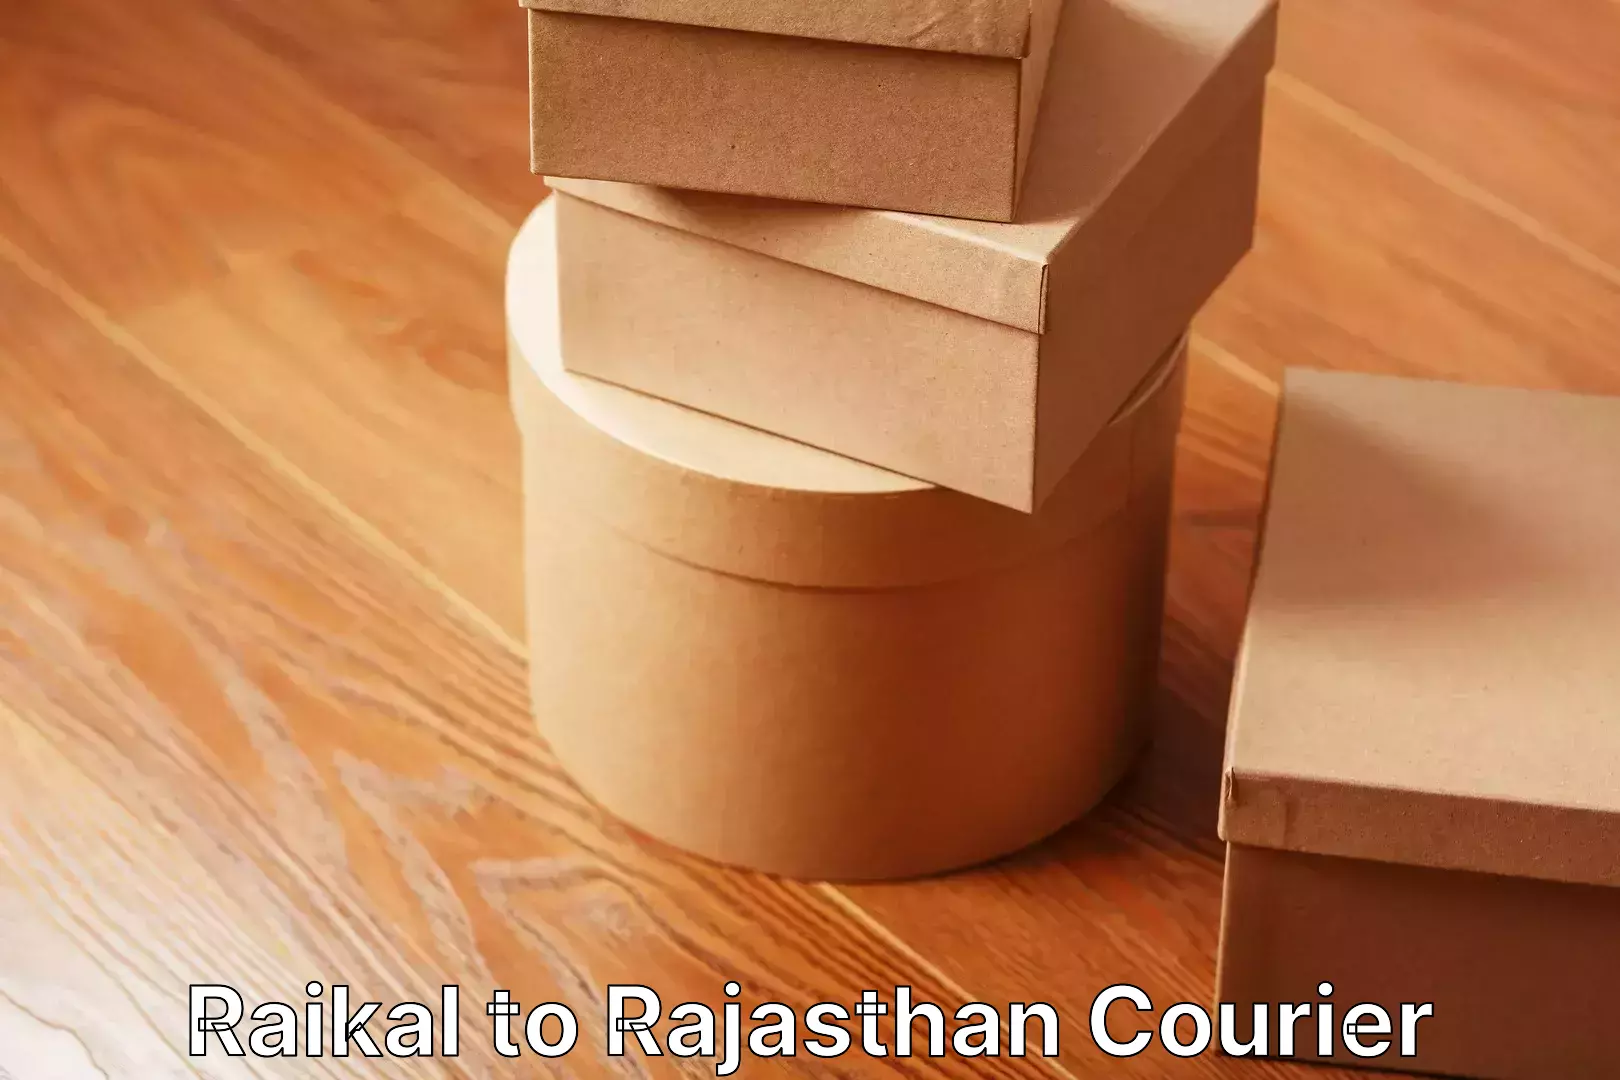 Moving and storage services Raikal to Rajasthan